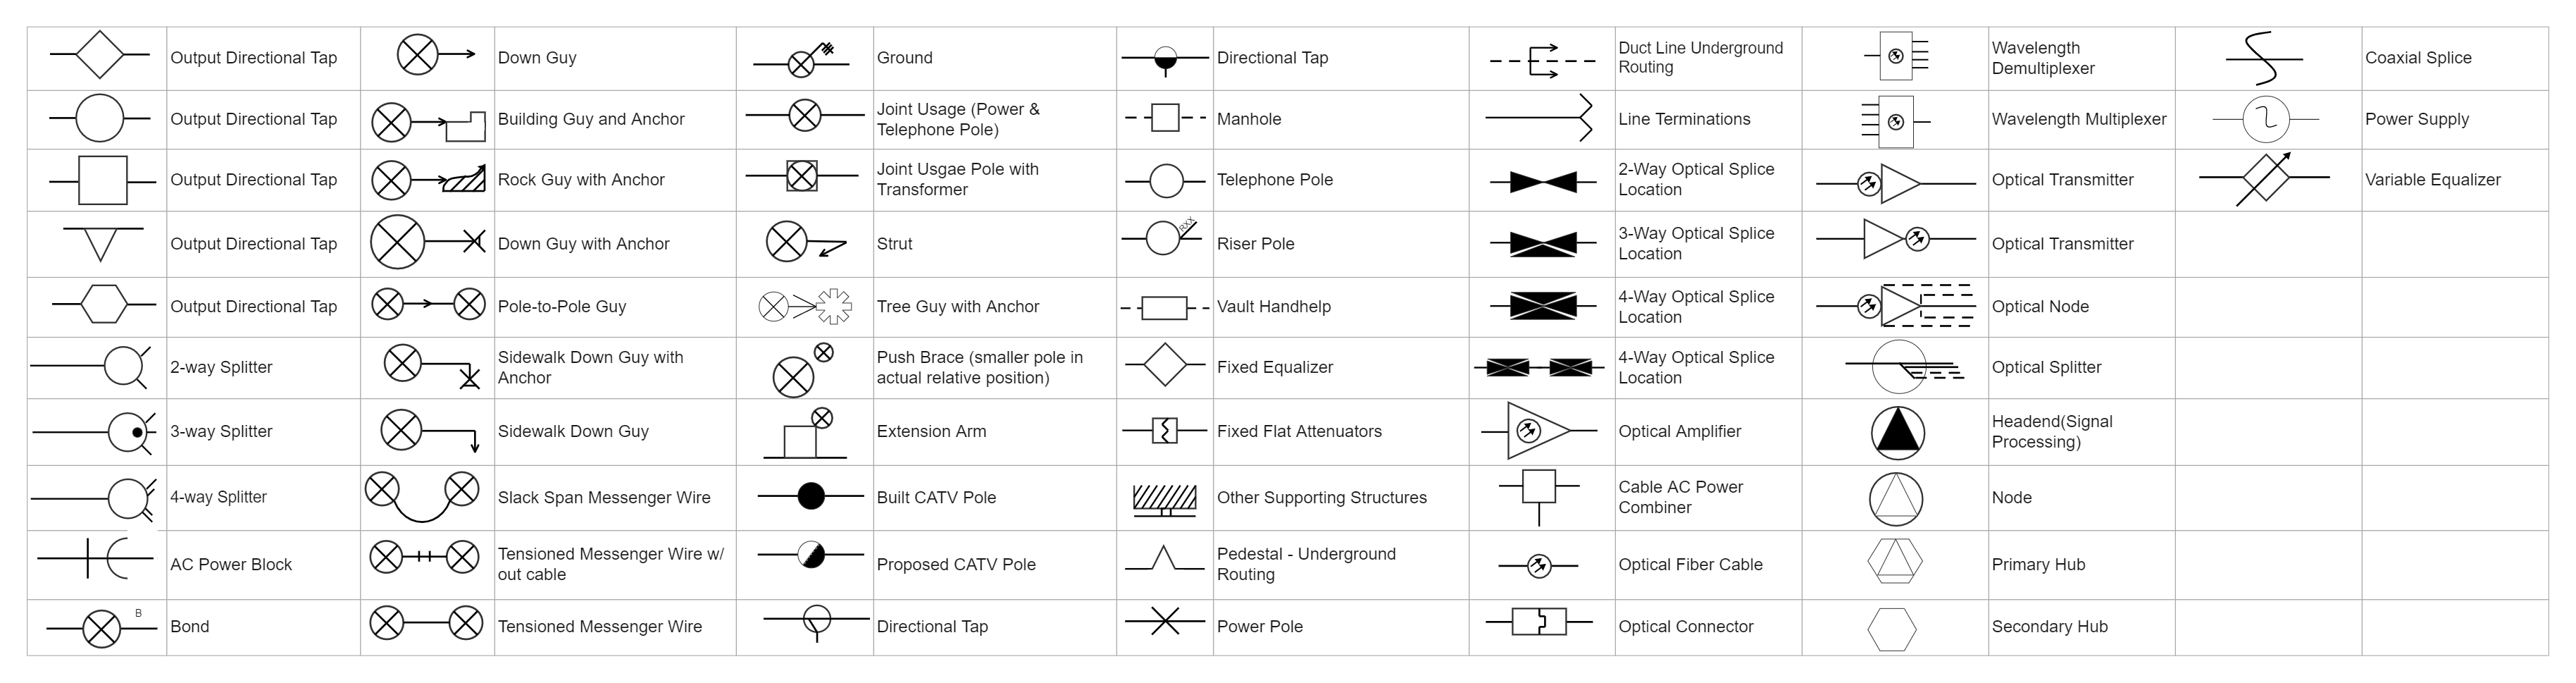 Electrical Cable TV Symbols